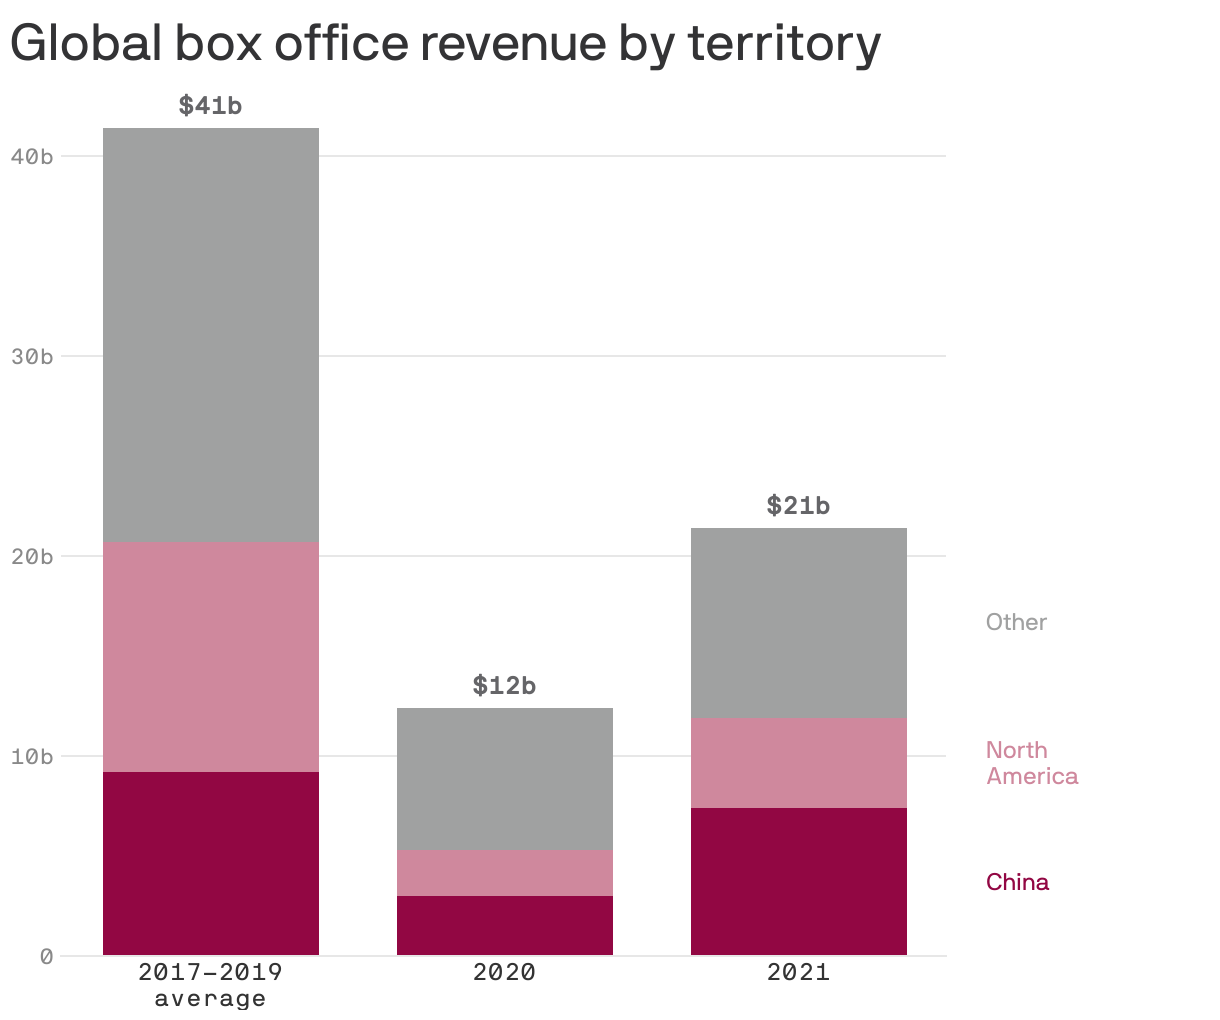 Global box office revenue by territory